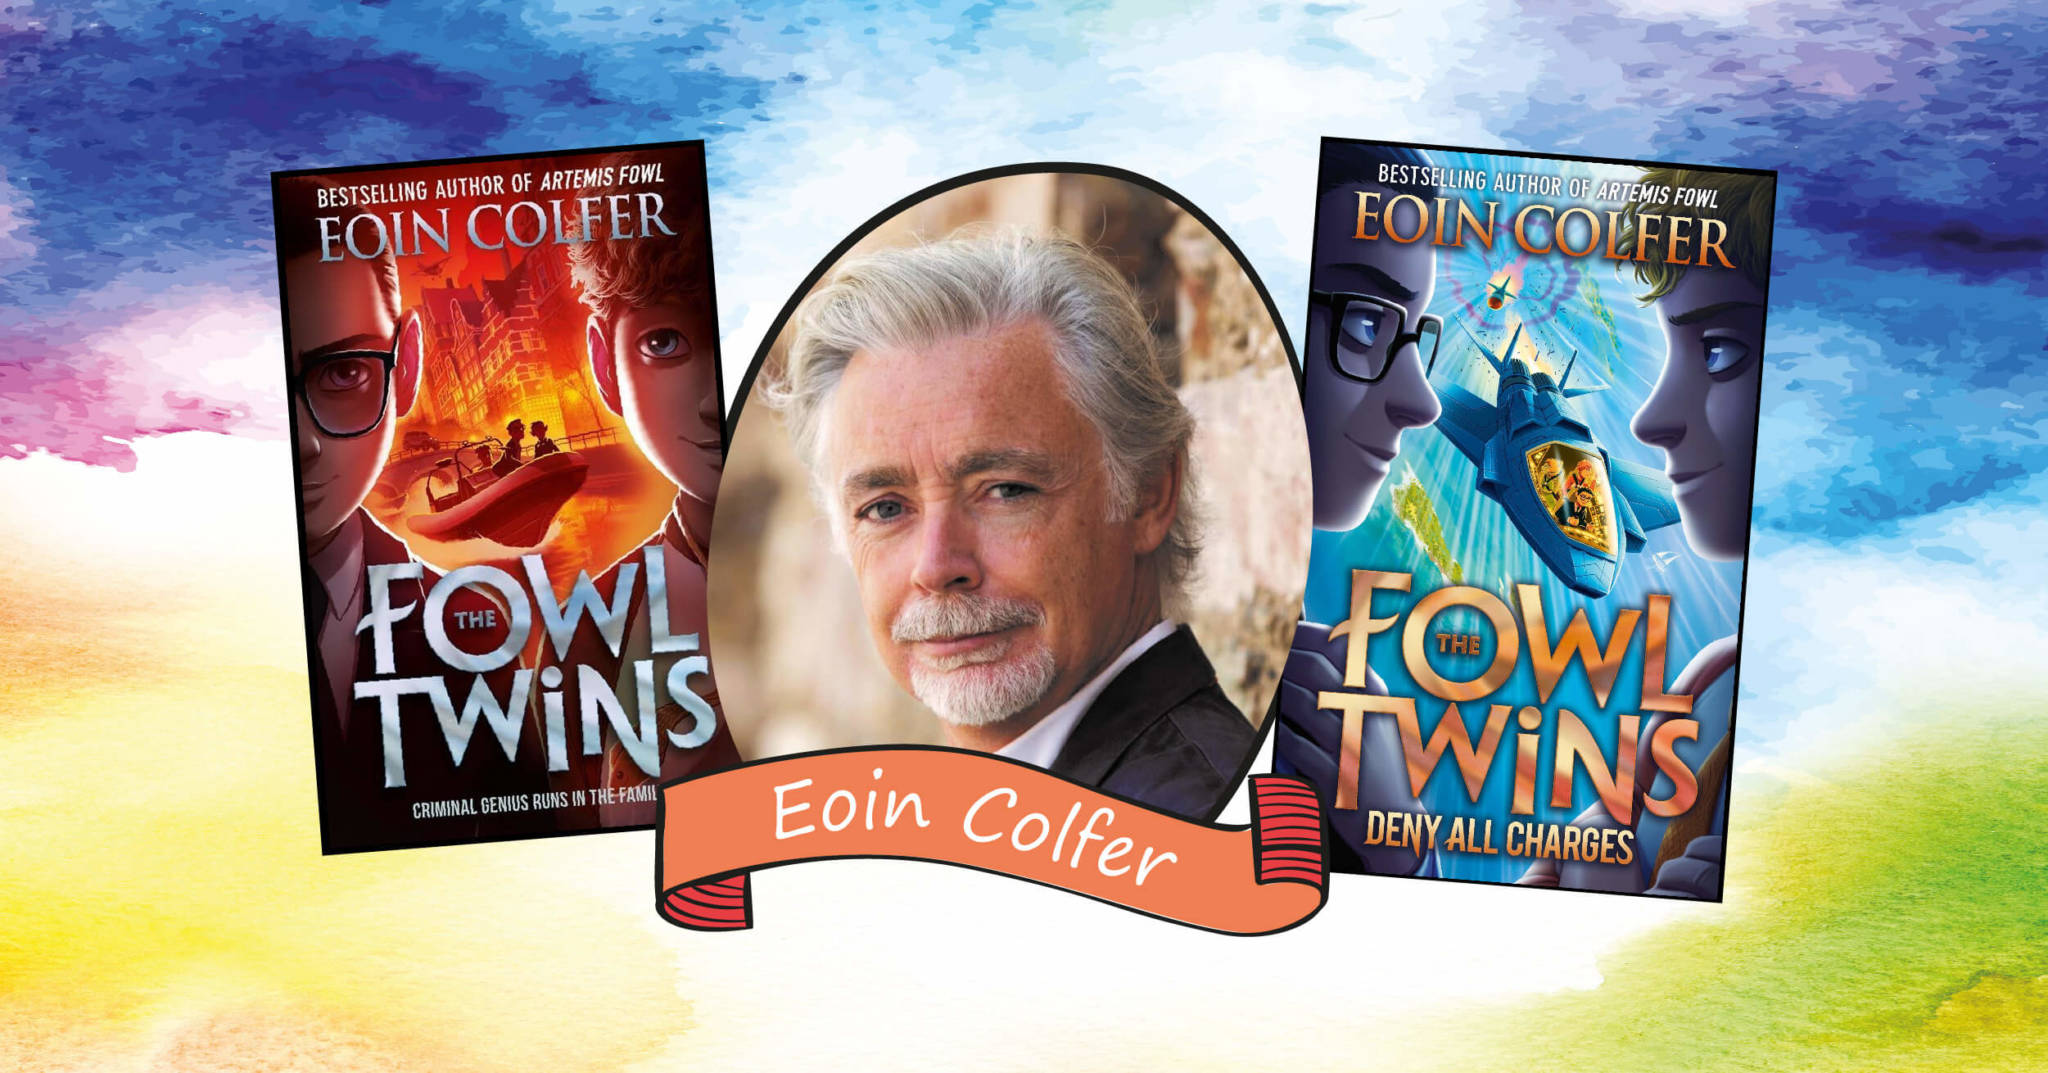 An Audience with Eoin Colfer